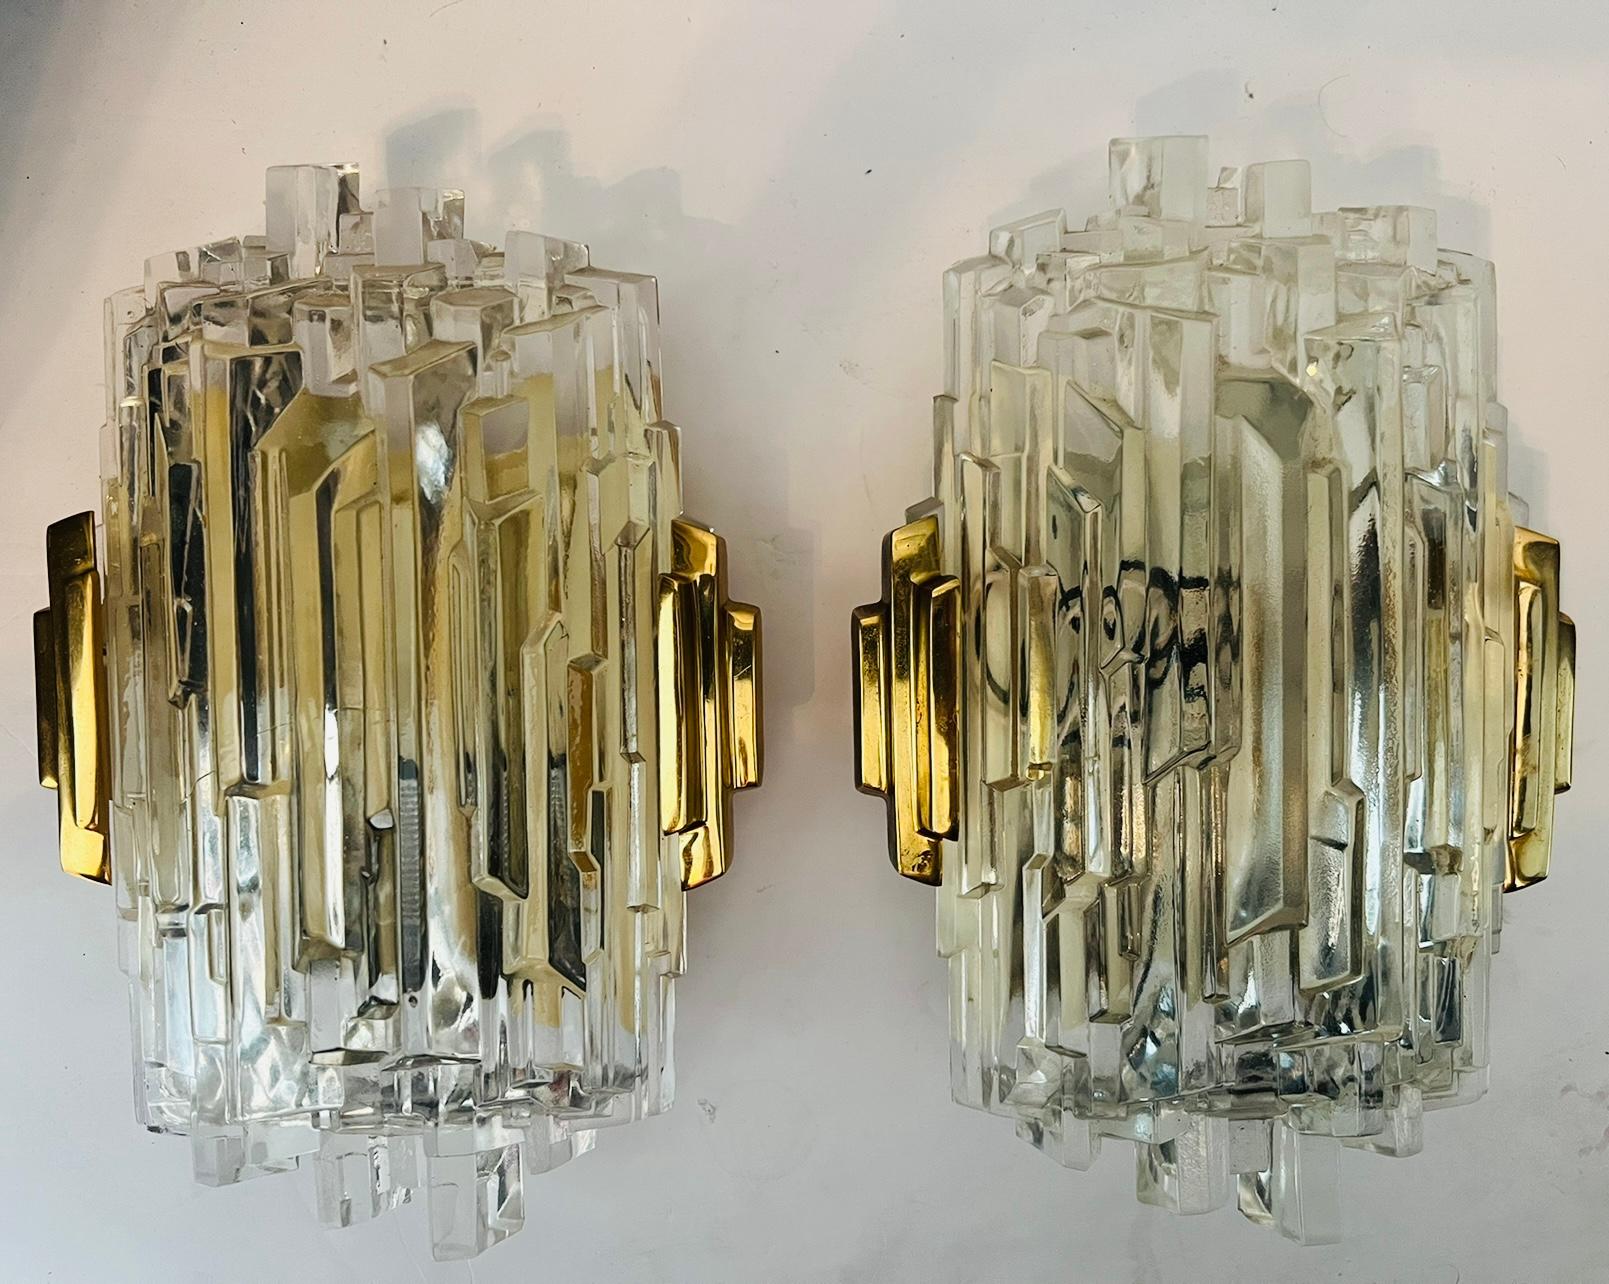 A luxurious set of 3 crystal ice wall lamps composed of golden brass fittings and ice glass shades. Newly rewired with candelabra sockets. Priced individually.